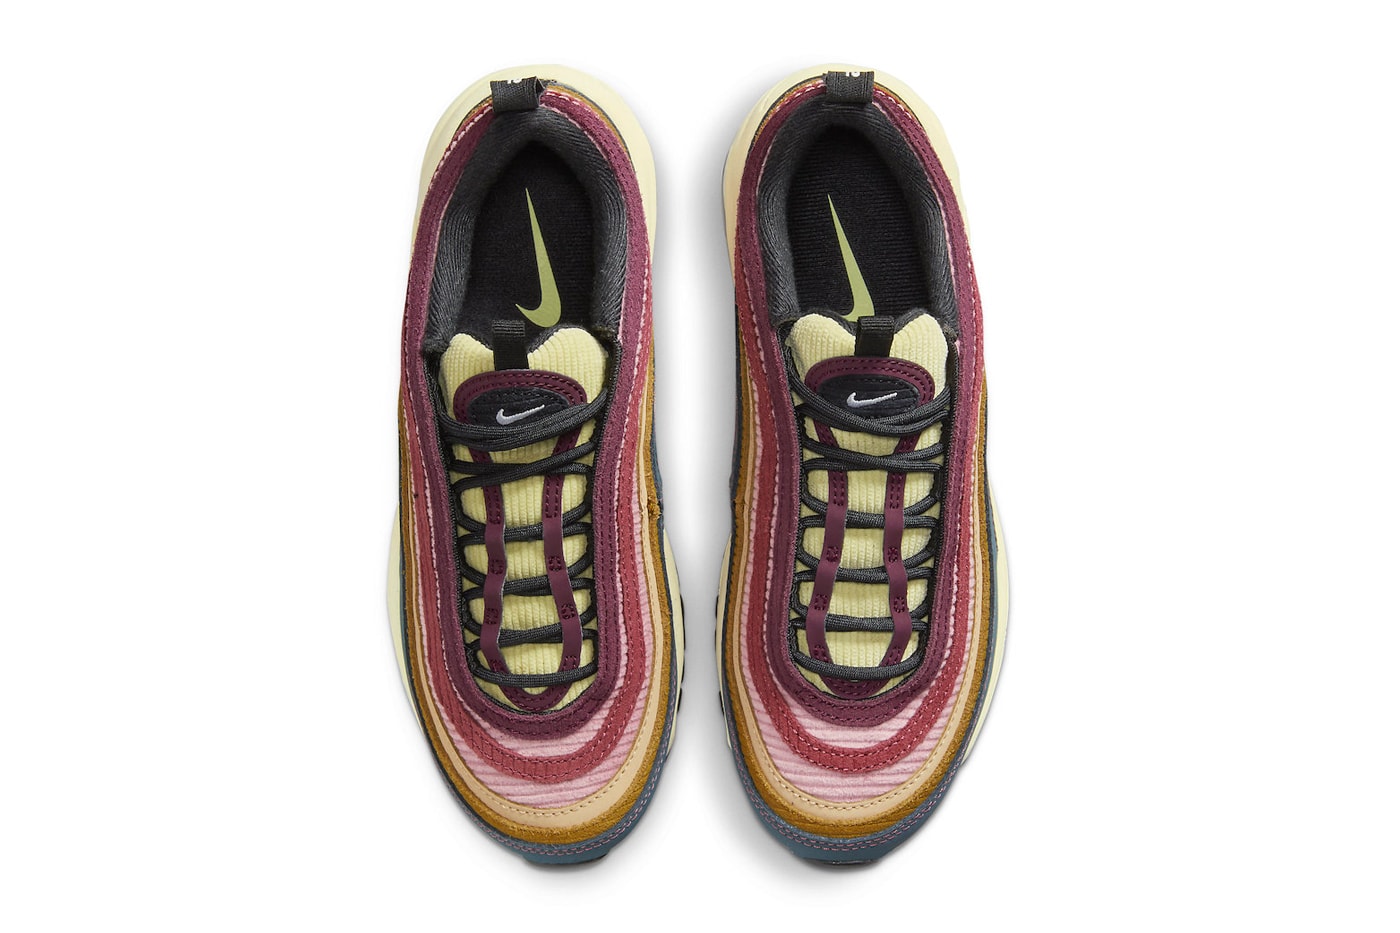 Nike Air Max 97 Arrives in Multi-Color "Corduroy" FB8454-300 swoosh release info